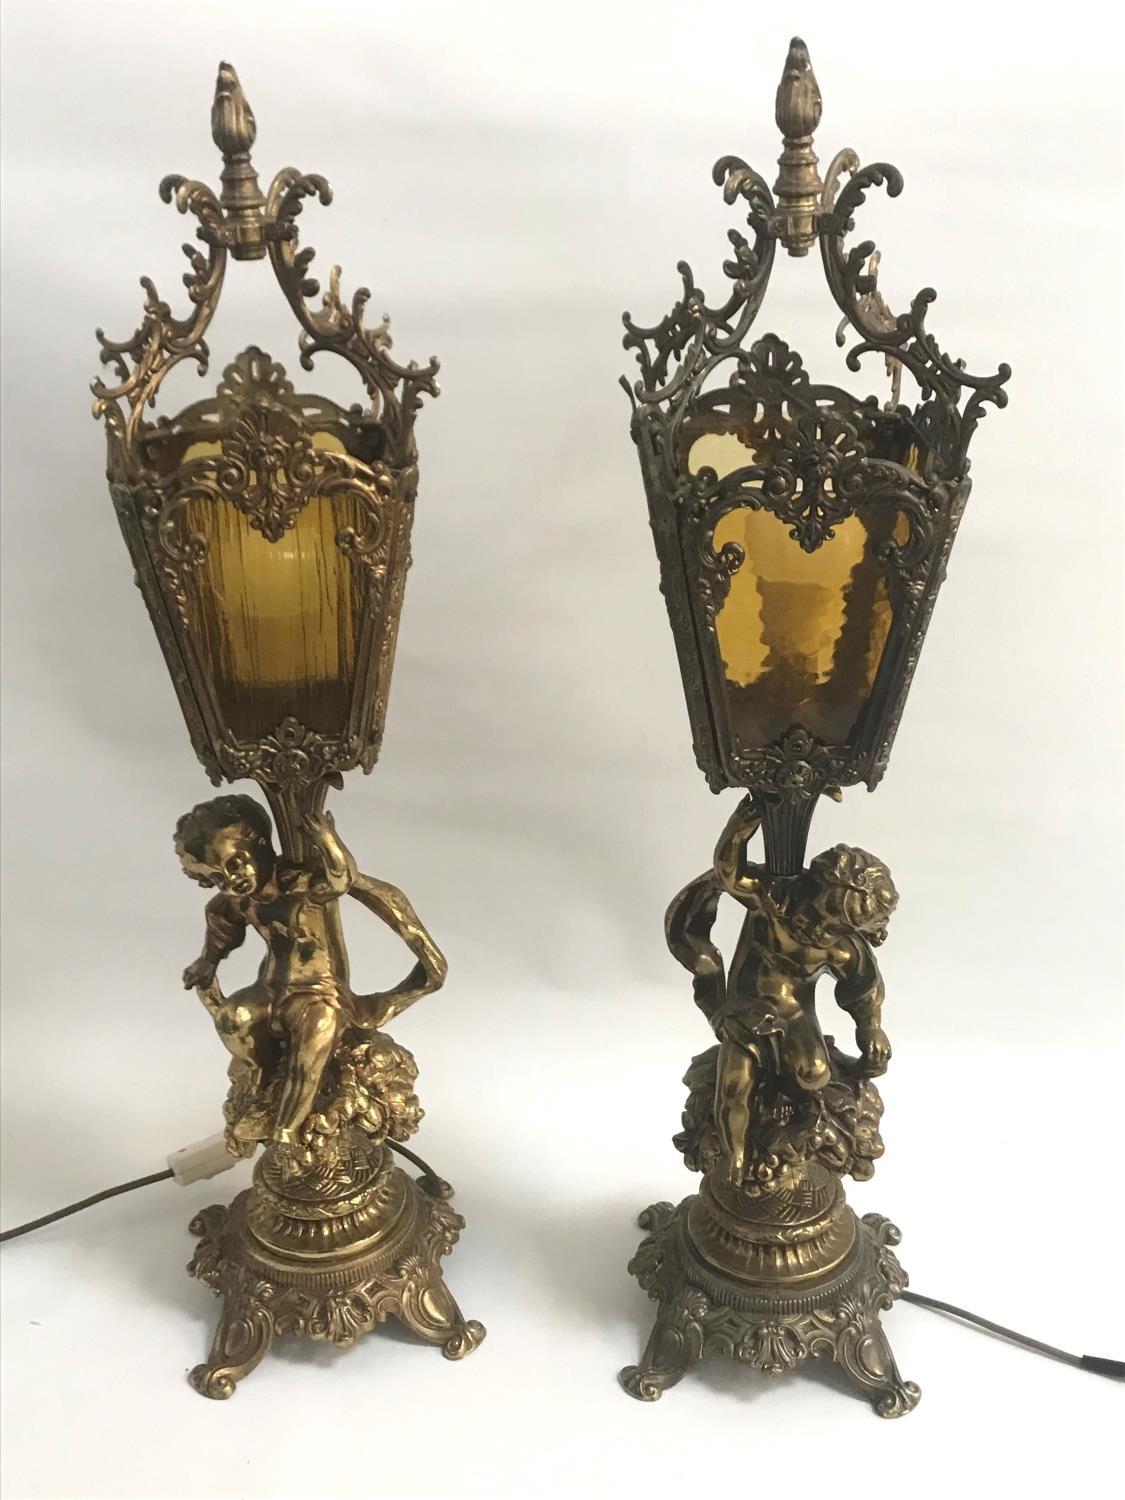 LARGE PAIR OF GILT METAL LAMPS the columns with putti seated on bushes below four sided mottled